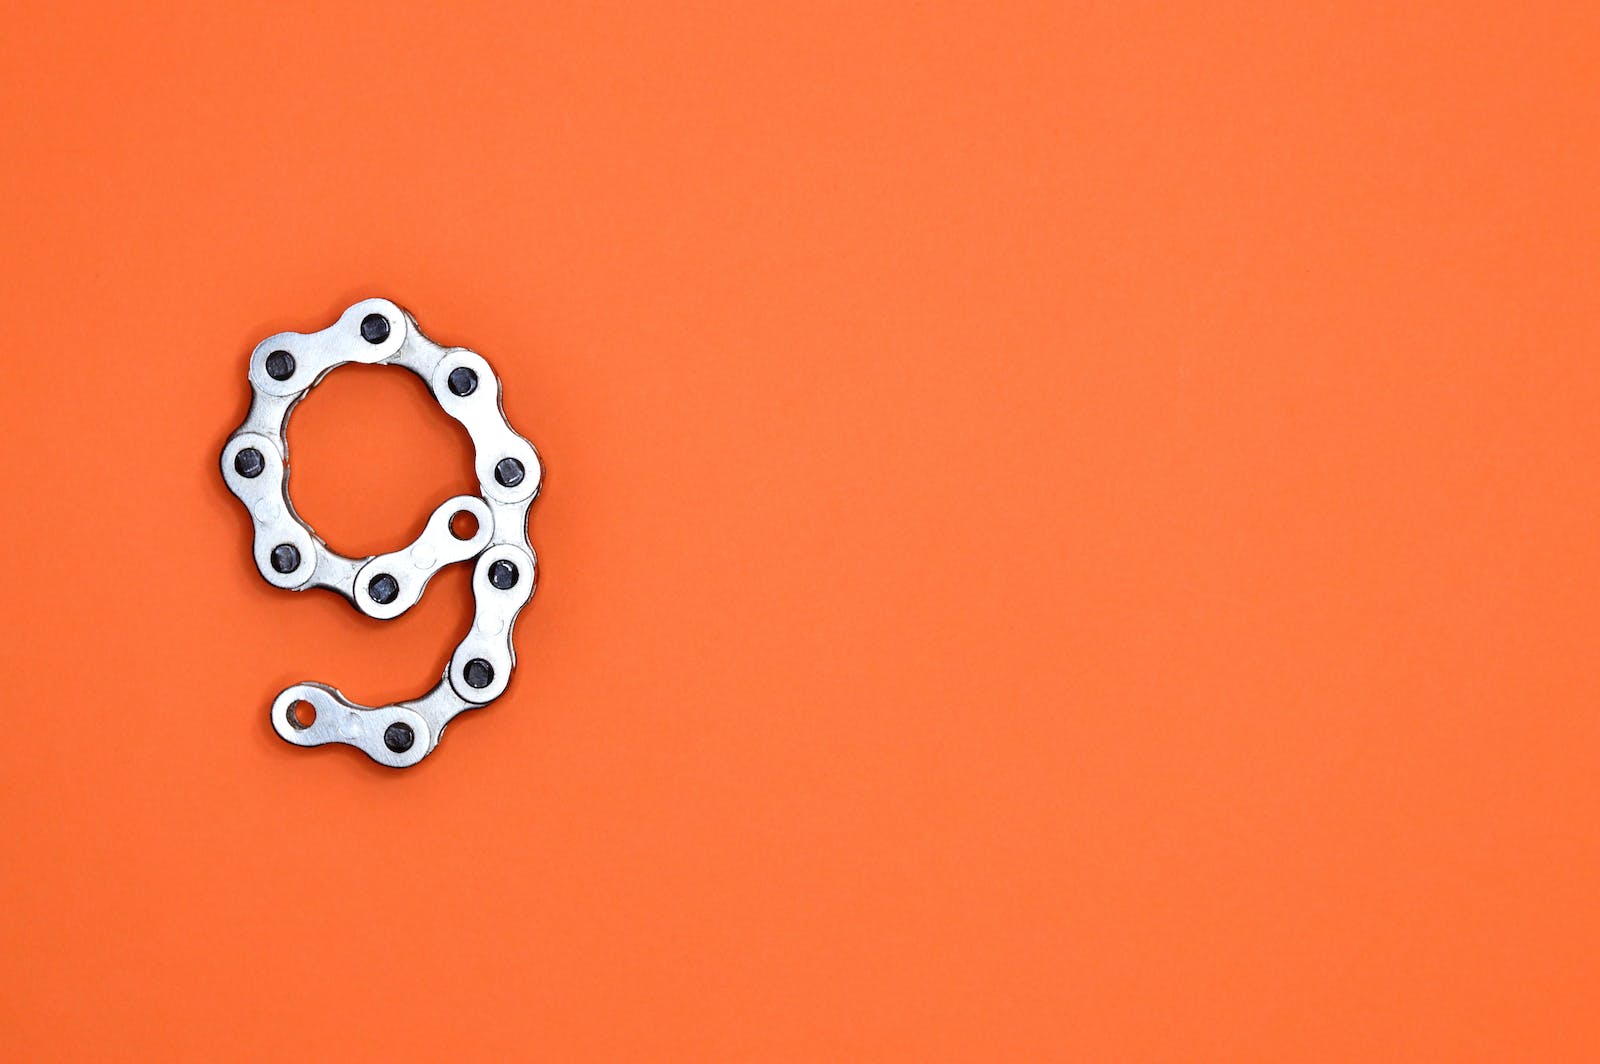 Gray Bicycle Chain on Orange Surface